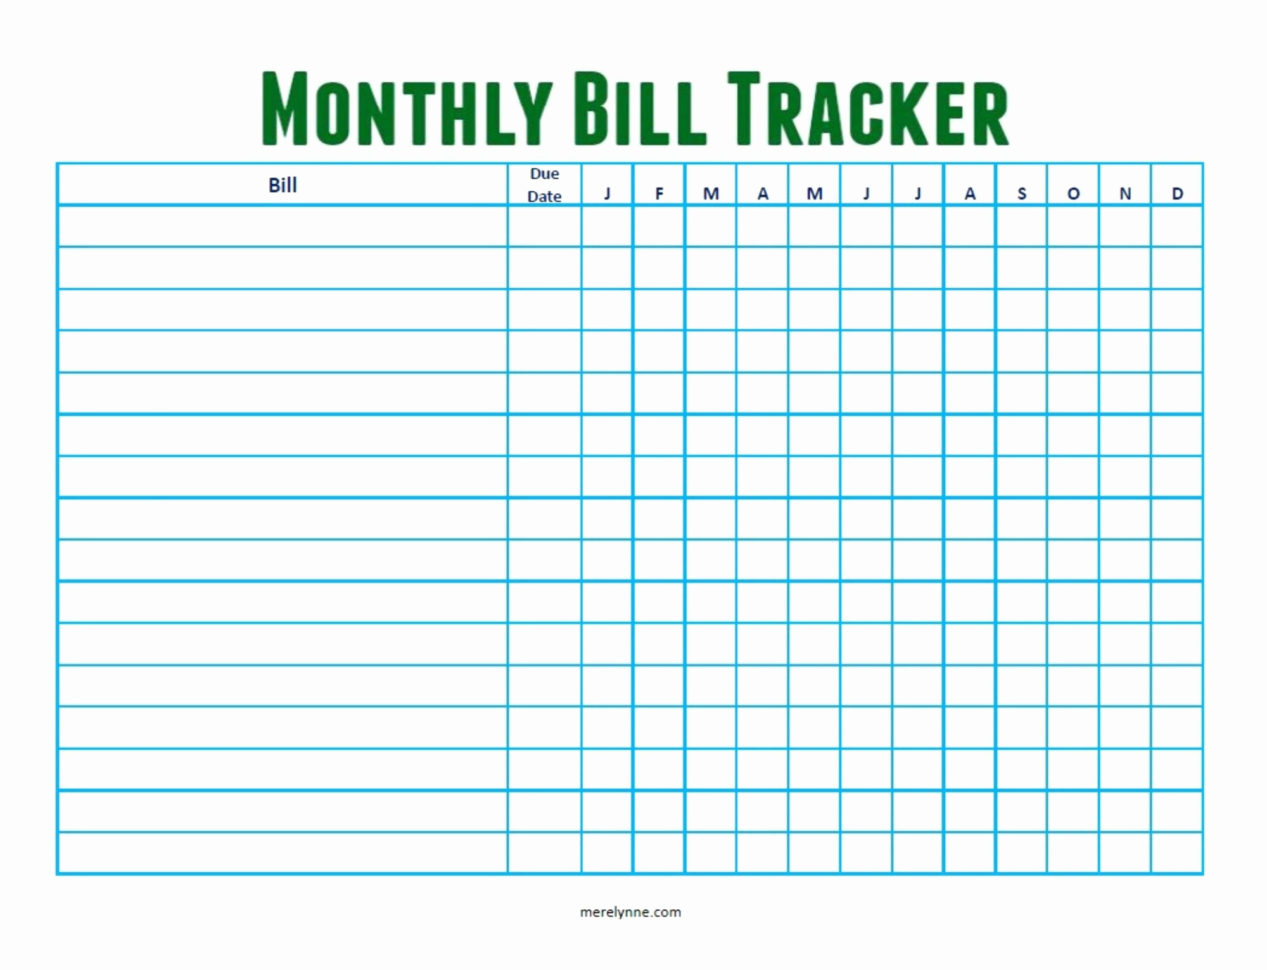 Bill Tracker Spreadsheet Pertaining To Bill Tracker Spreadsheet Printable Payment Weekly Monthly